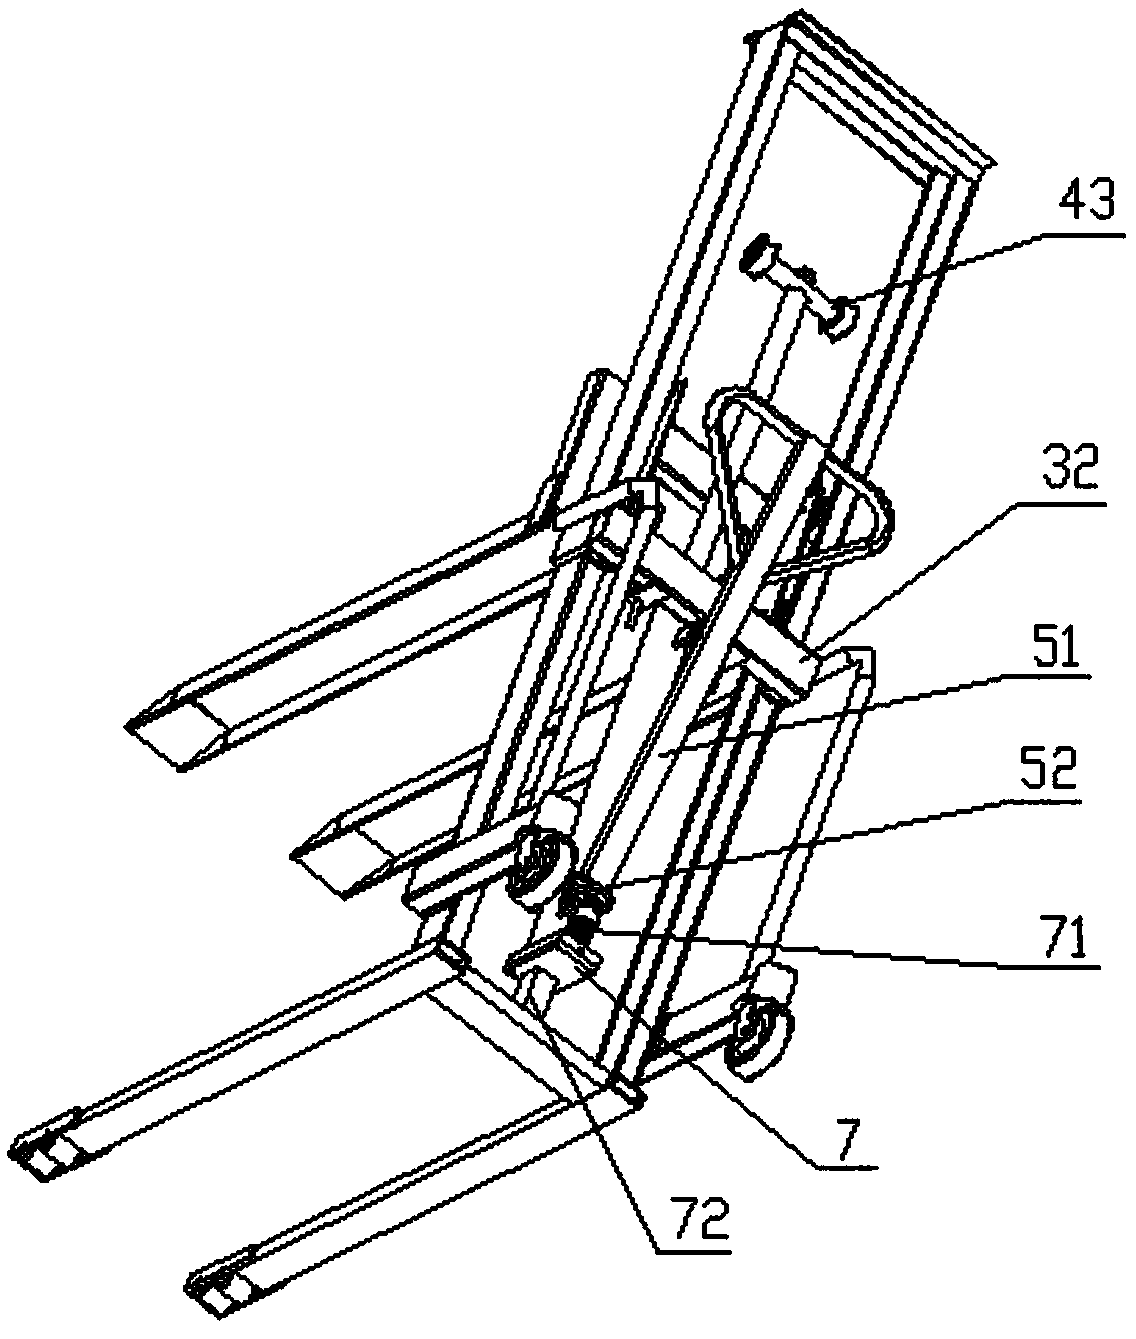 Hand cart for construction object-carrying ascending operation